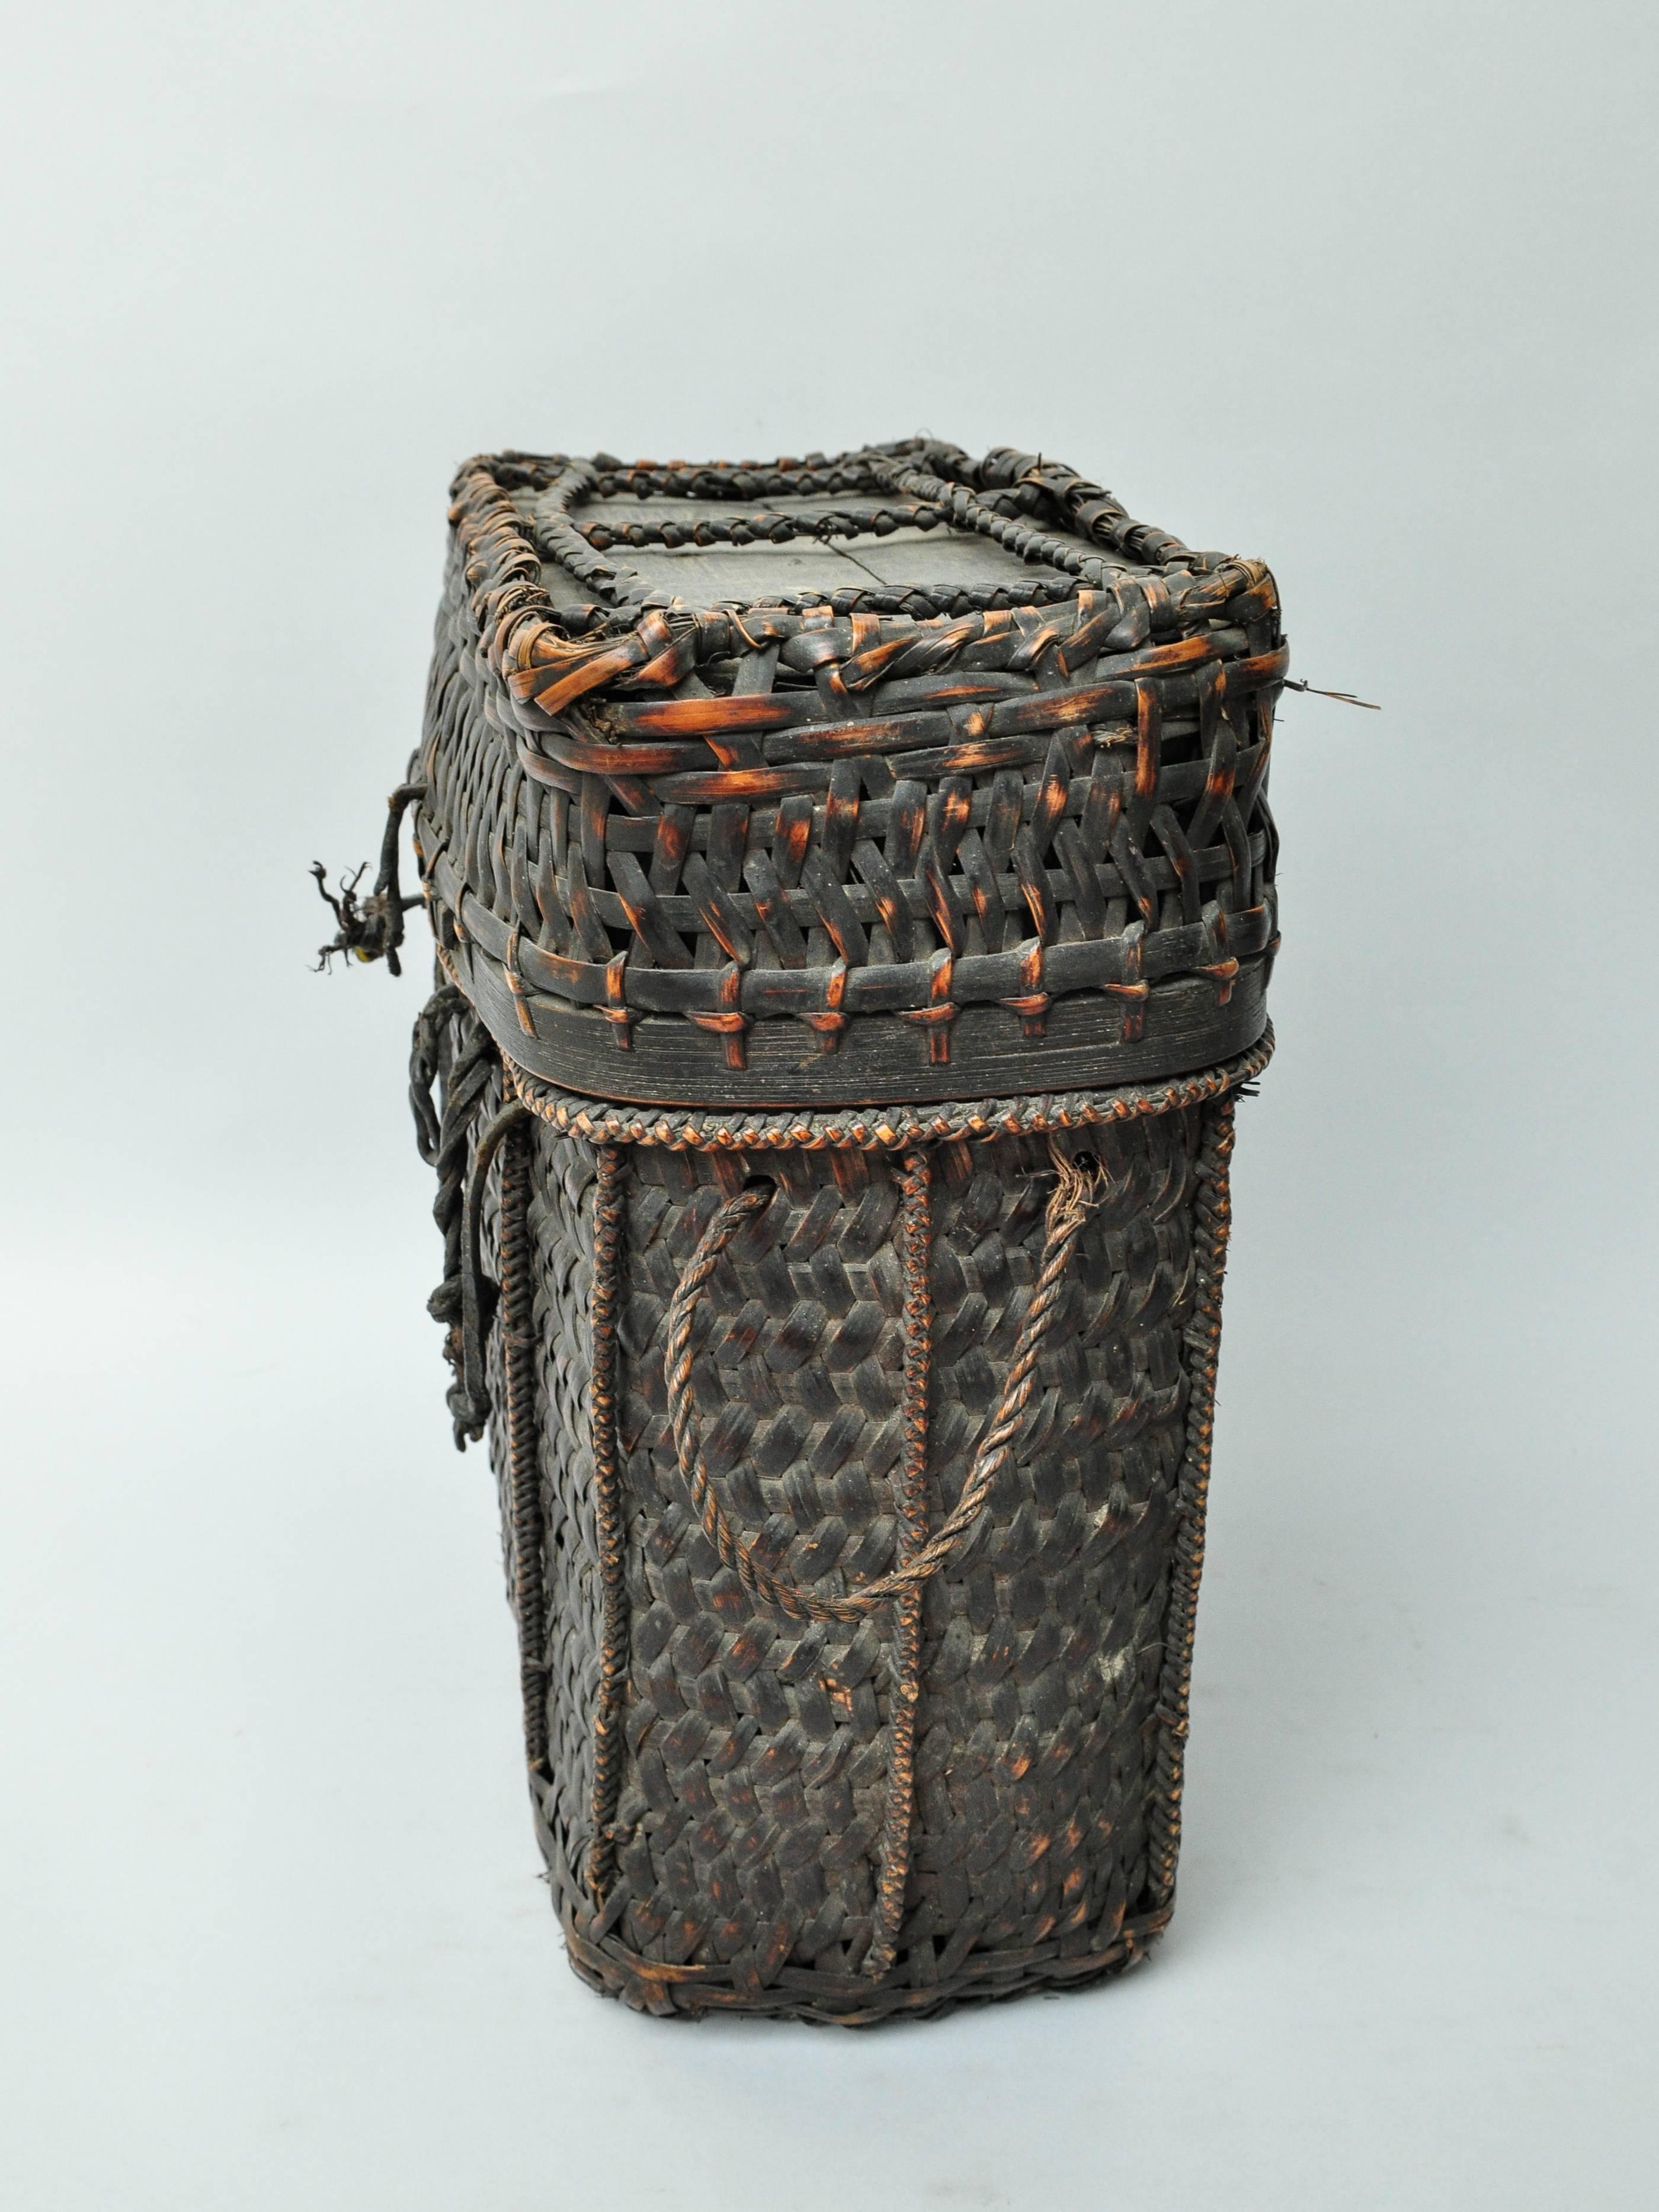 Tribal storage and carrying basket with lid from Bhutan, mid-late 20th century
Handwoven of bamboo with wood incorporated into the base and top for added strength. This strong rustic basket would have been used to store and transport household good